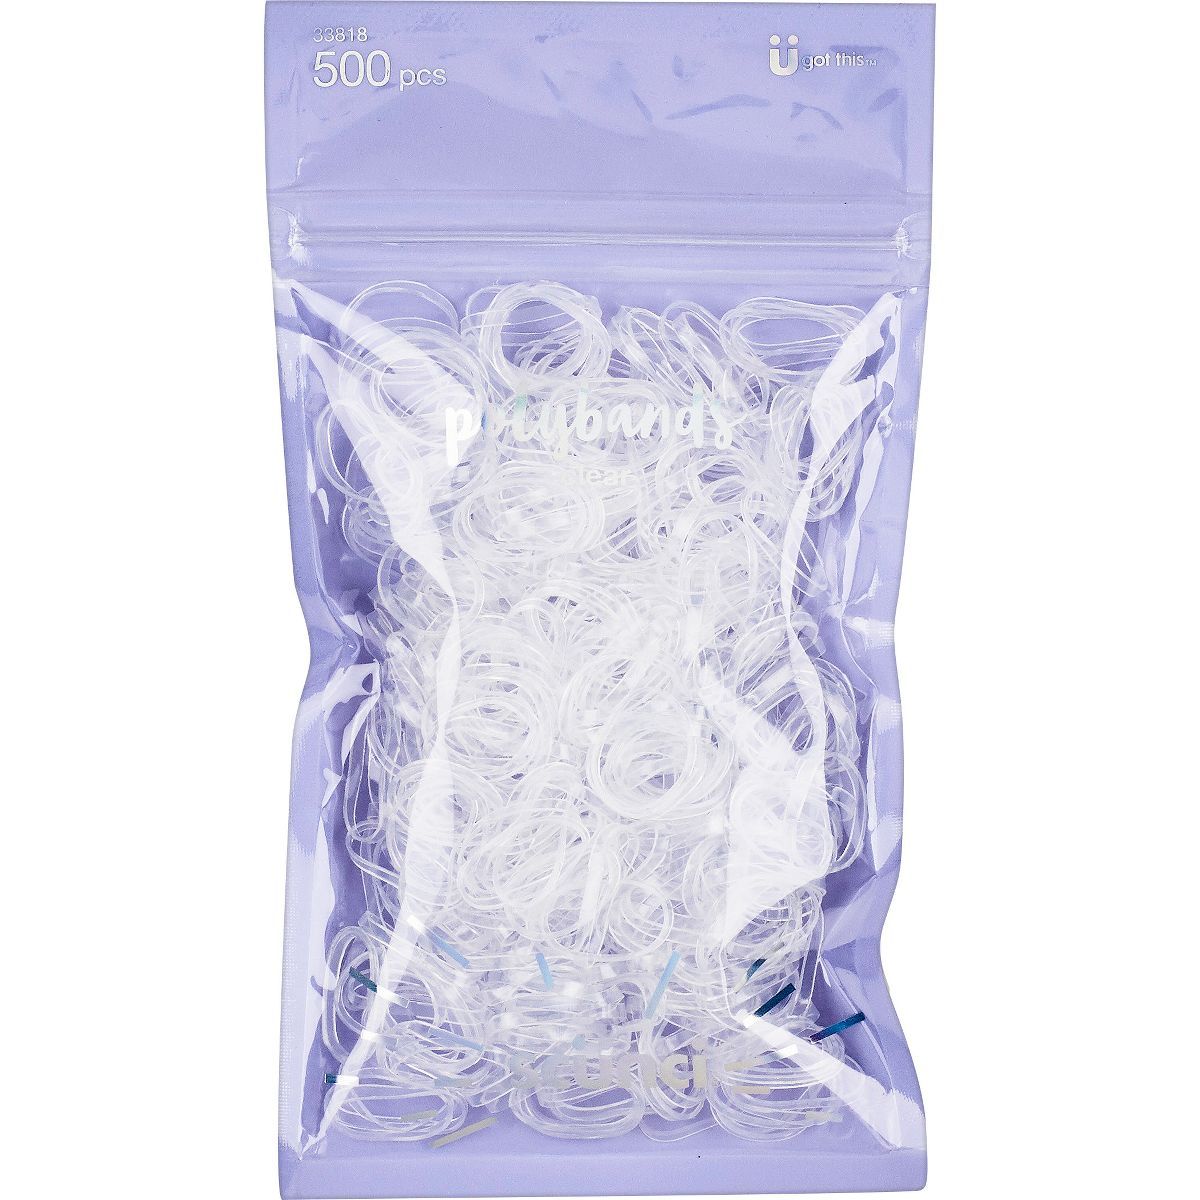 scunci Medium Size Polyband Hair Ties - Clear - 500ct | Target